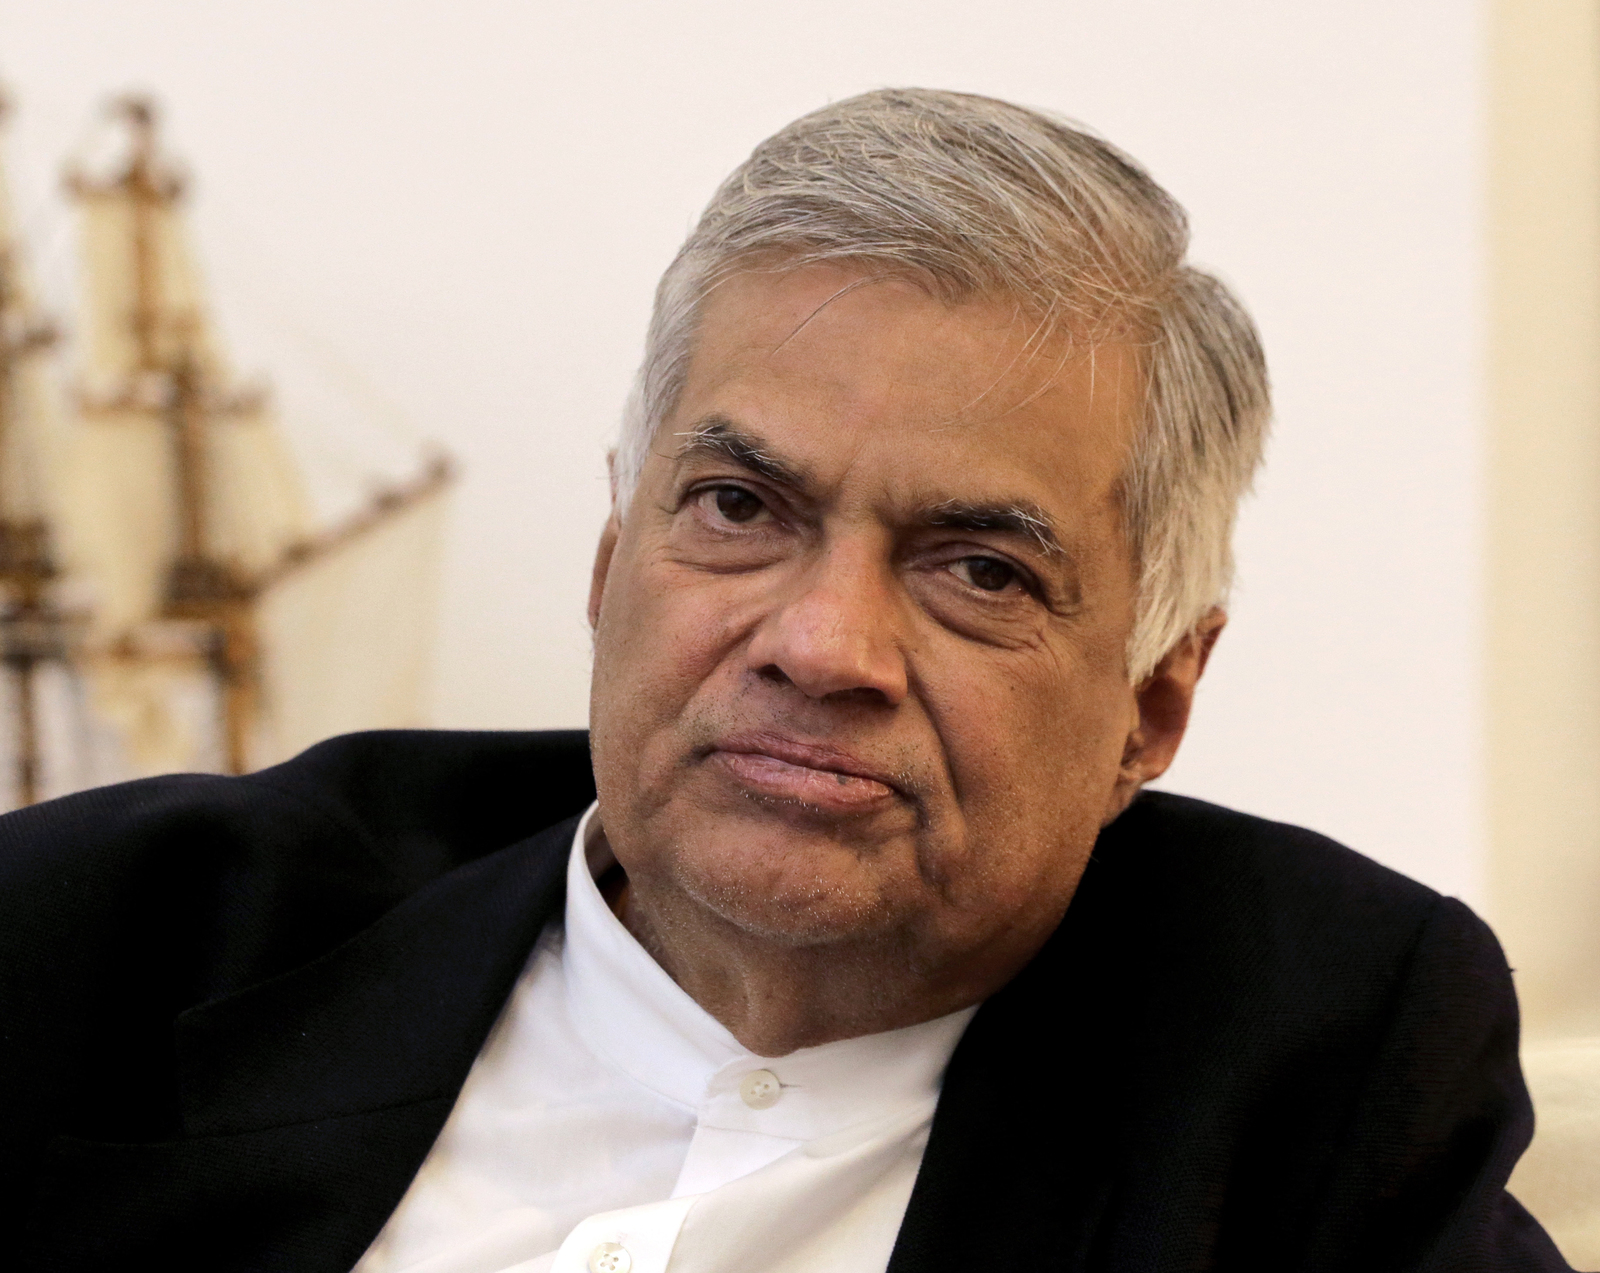 sri-lankan-president-doubts-he-can-work-with-reappointed-pm-richmond-register-3.jpg